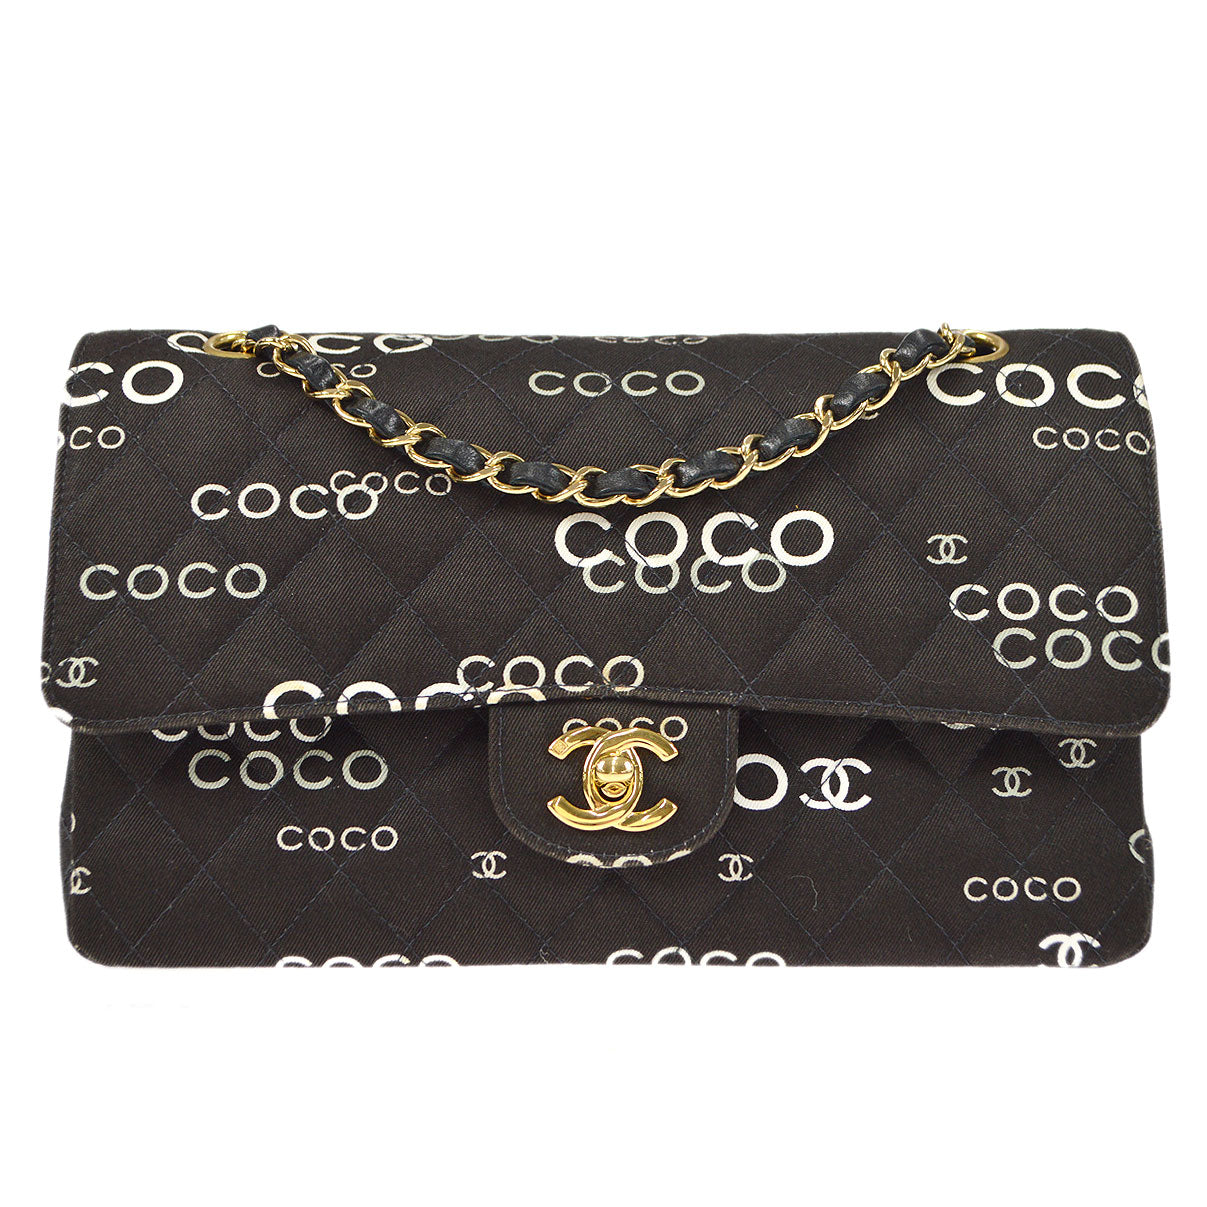 CHANEL 2001-2003 COCO patterned Classic Double Flap Medium Black Canva